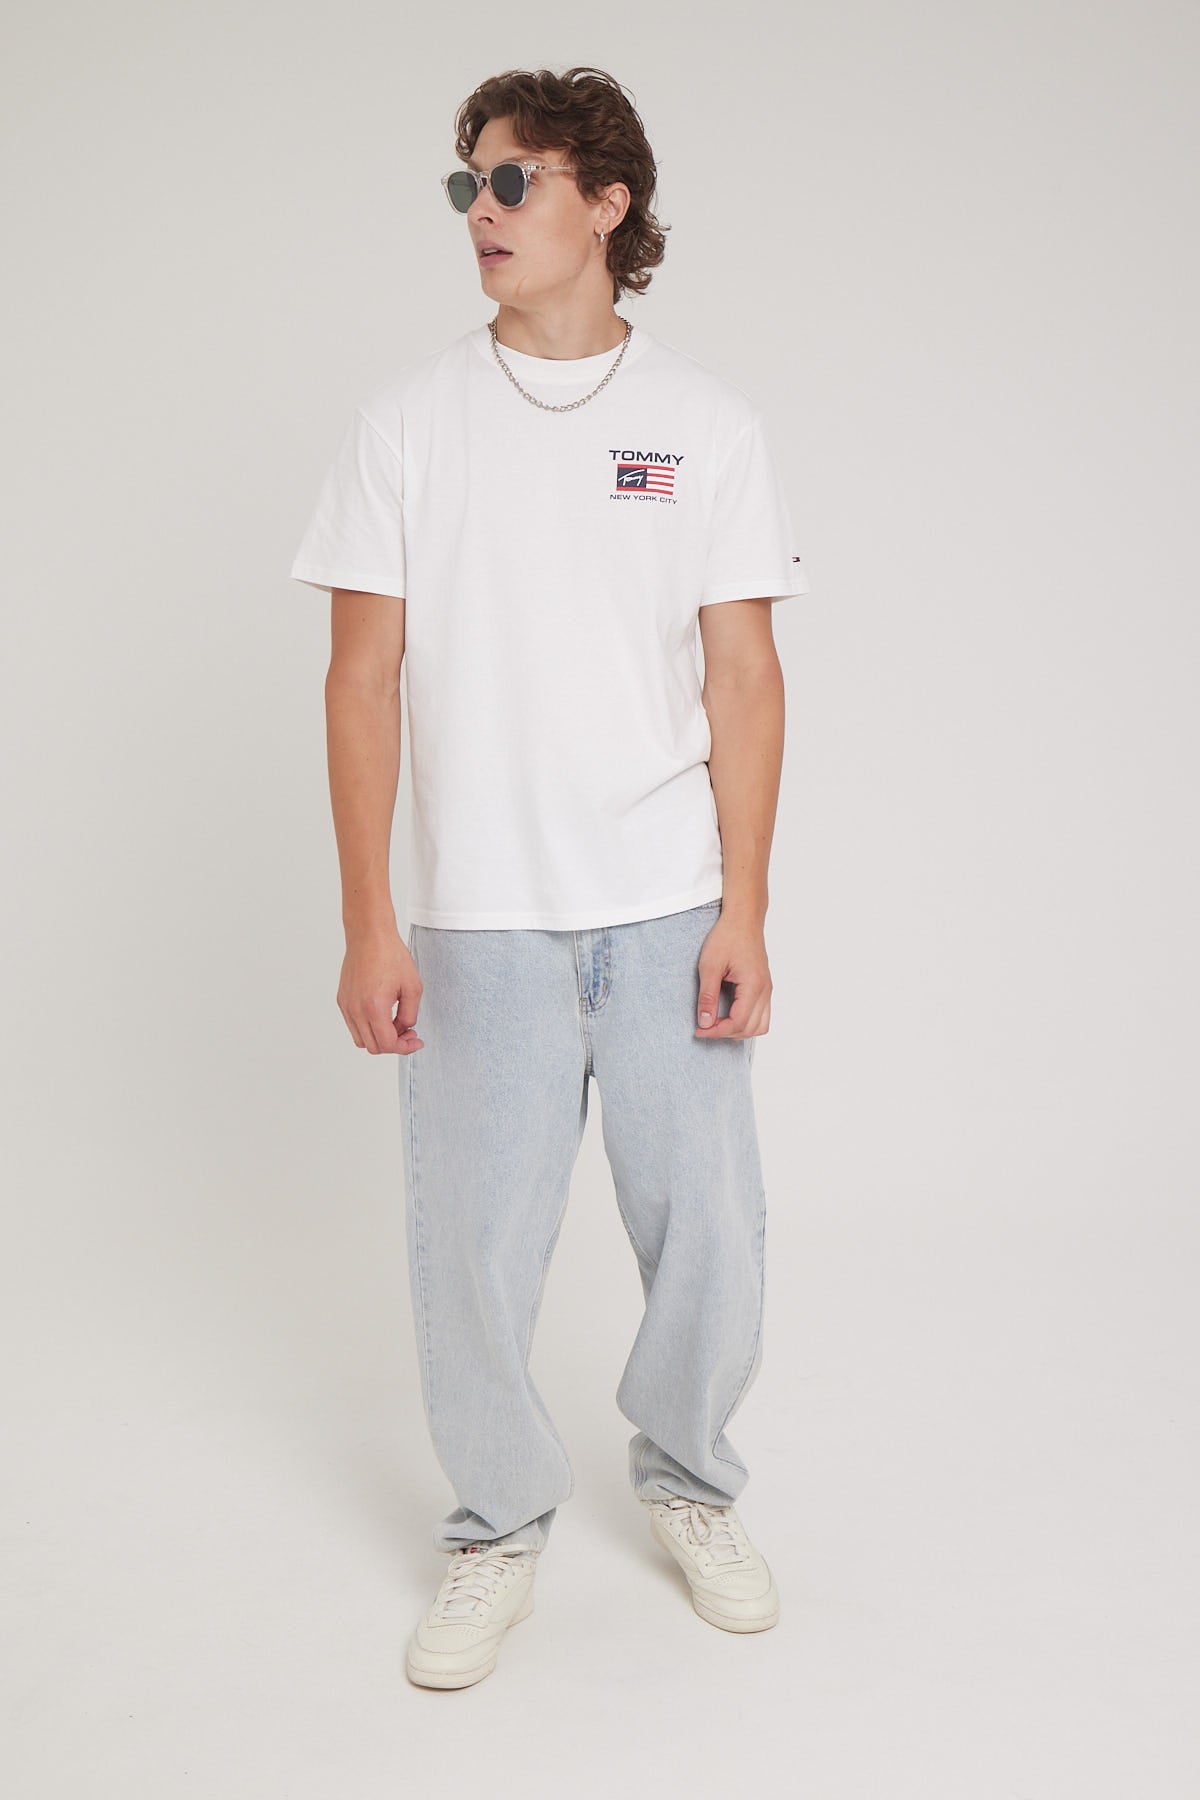 Tommy Jeans TJM CLSC Athletic Flag Tee White